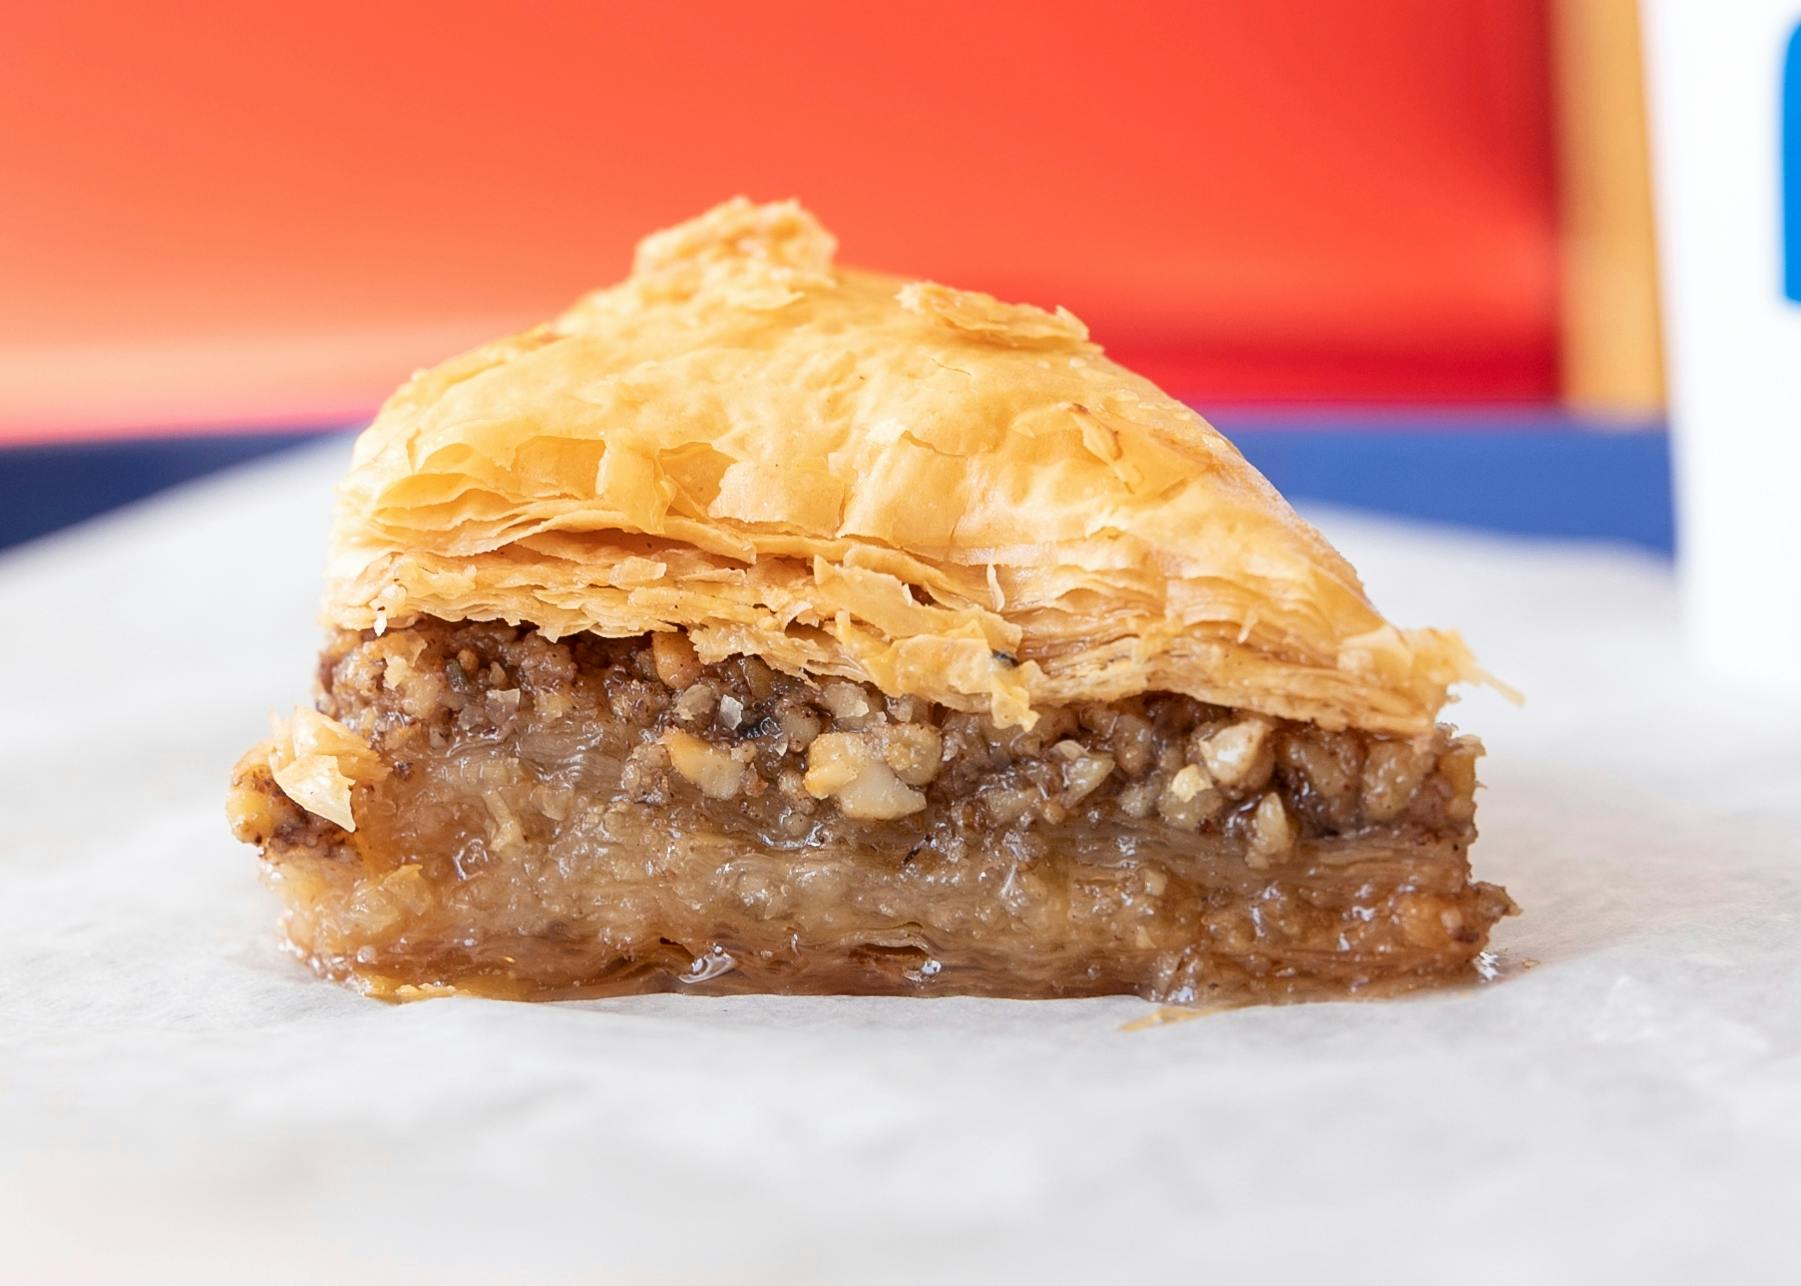 Honey Drenched Baklava Pastry from Niko's Gyros in Appleton, WI